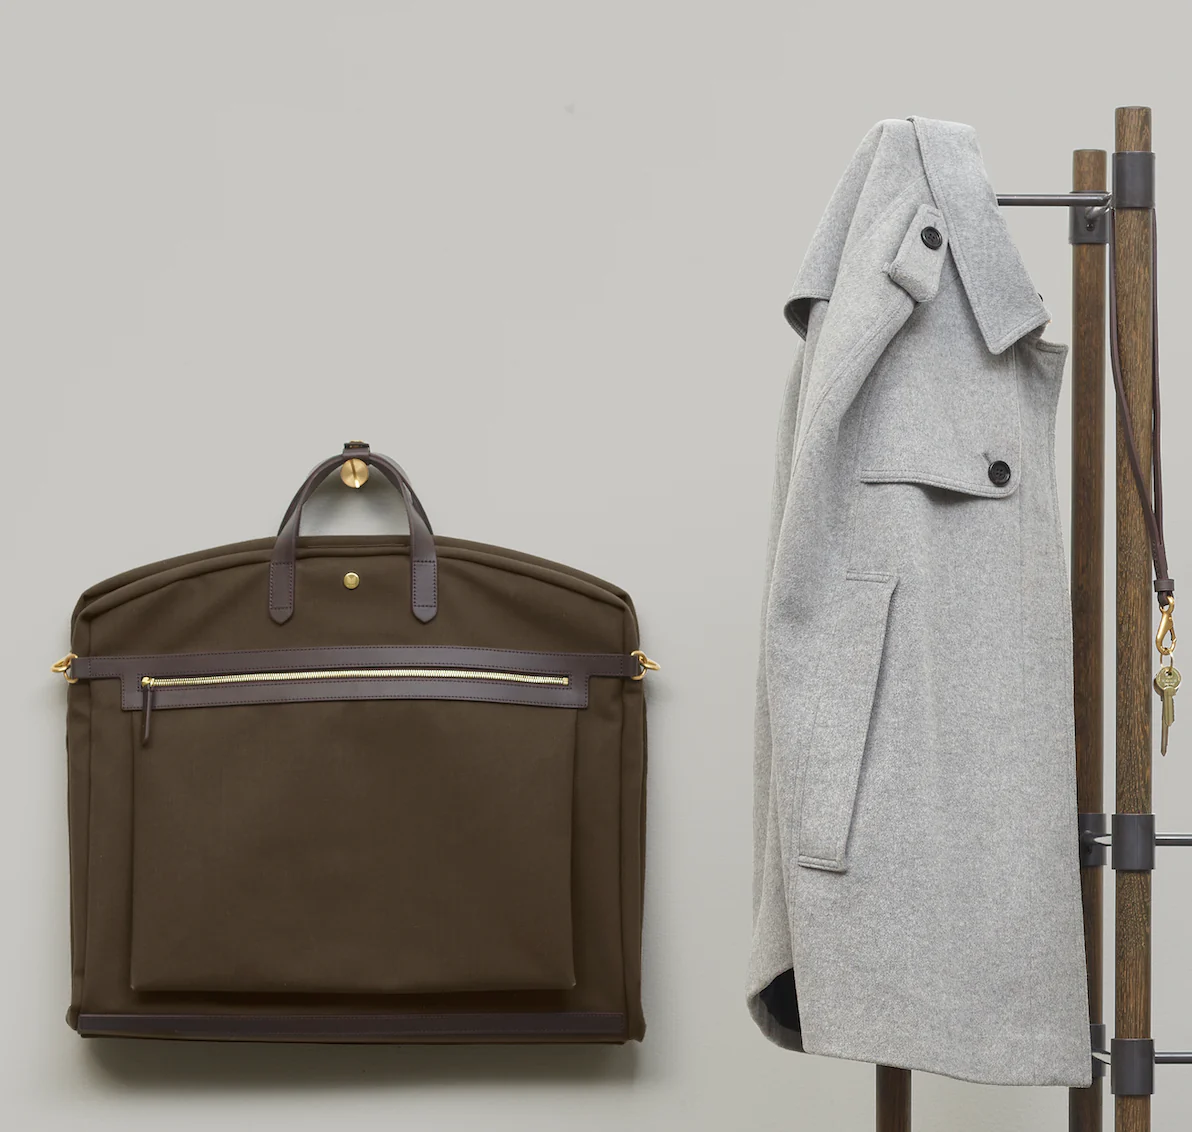 The 9 Best Garment Bags of 2023